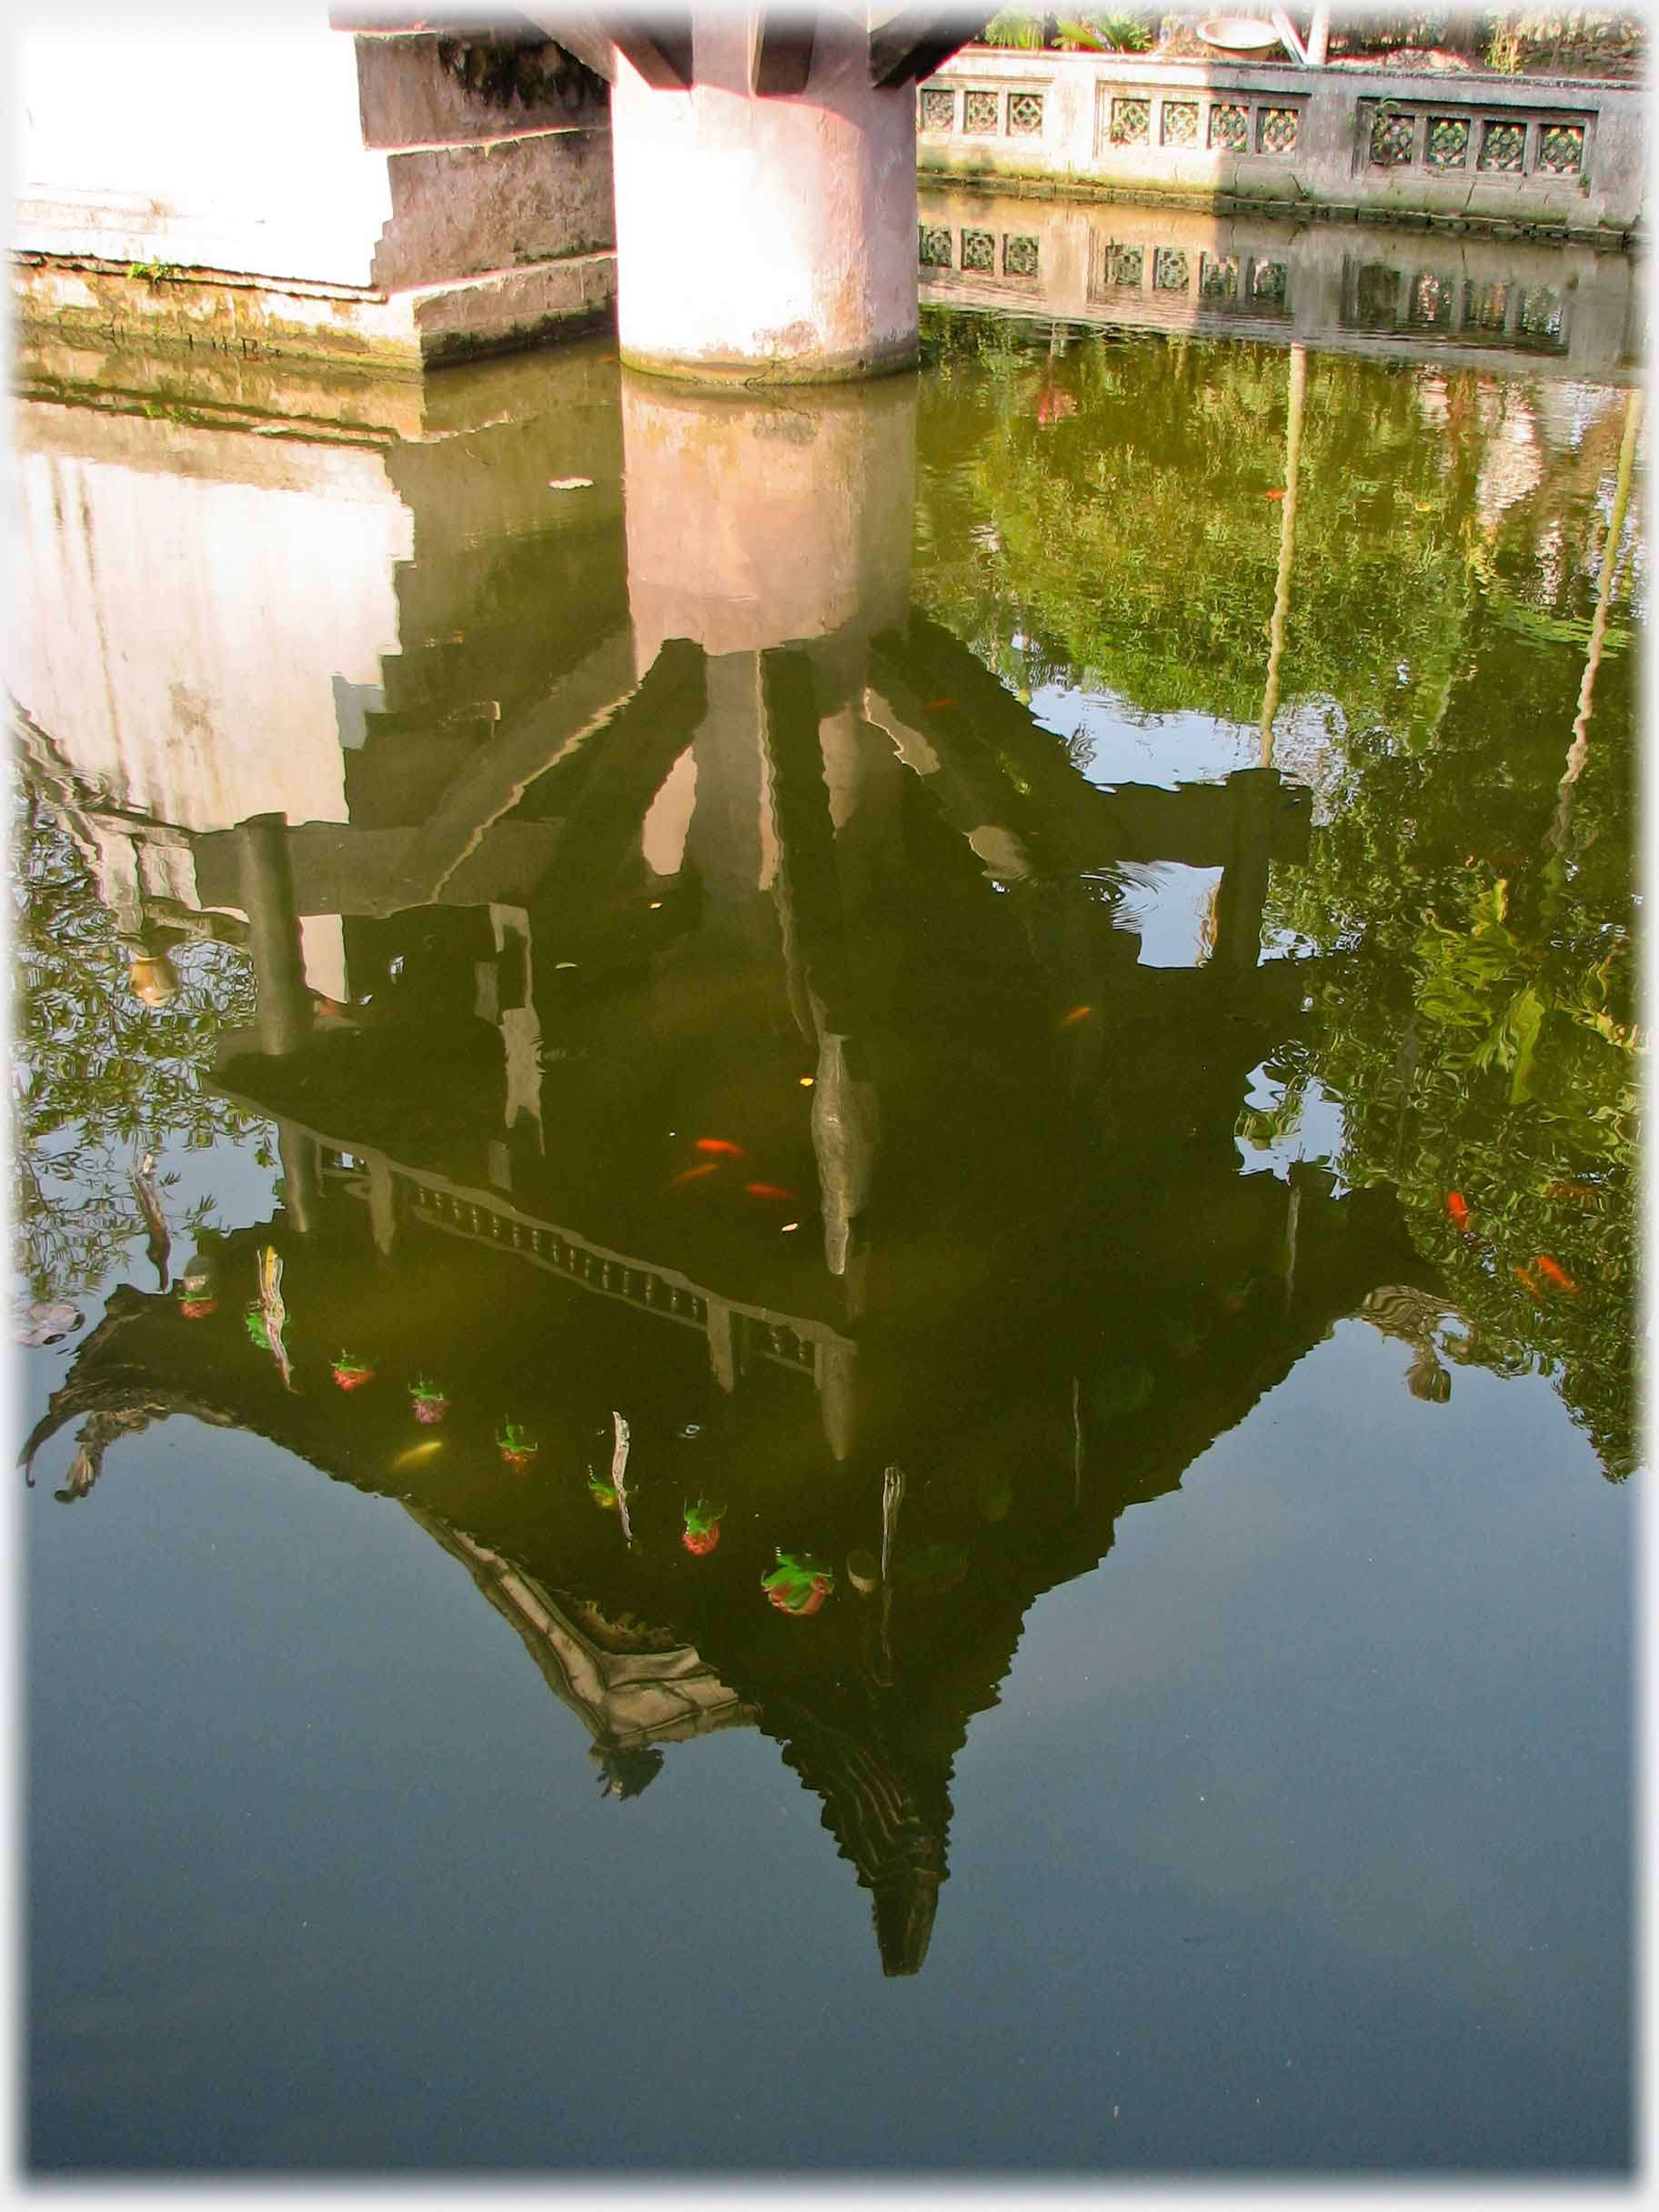 Reflection in pool of pagoda on column.